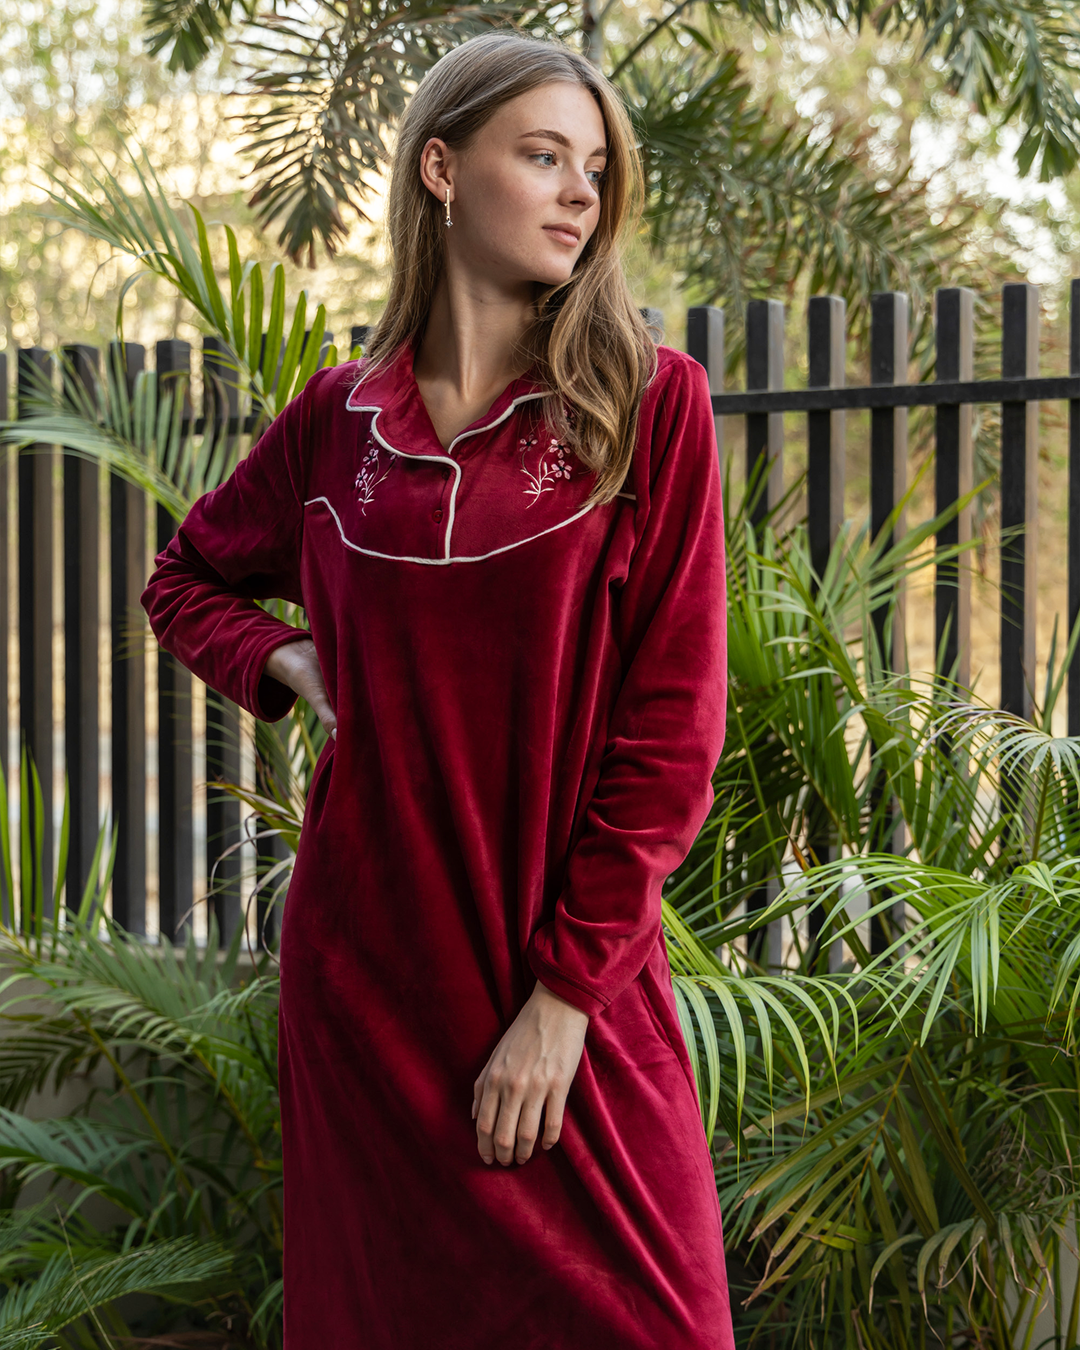 Women's velor robe with floral embroidery